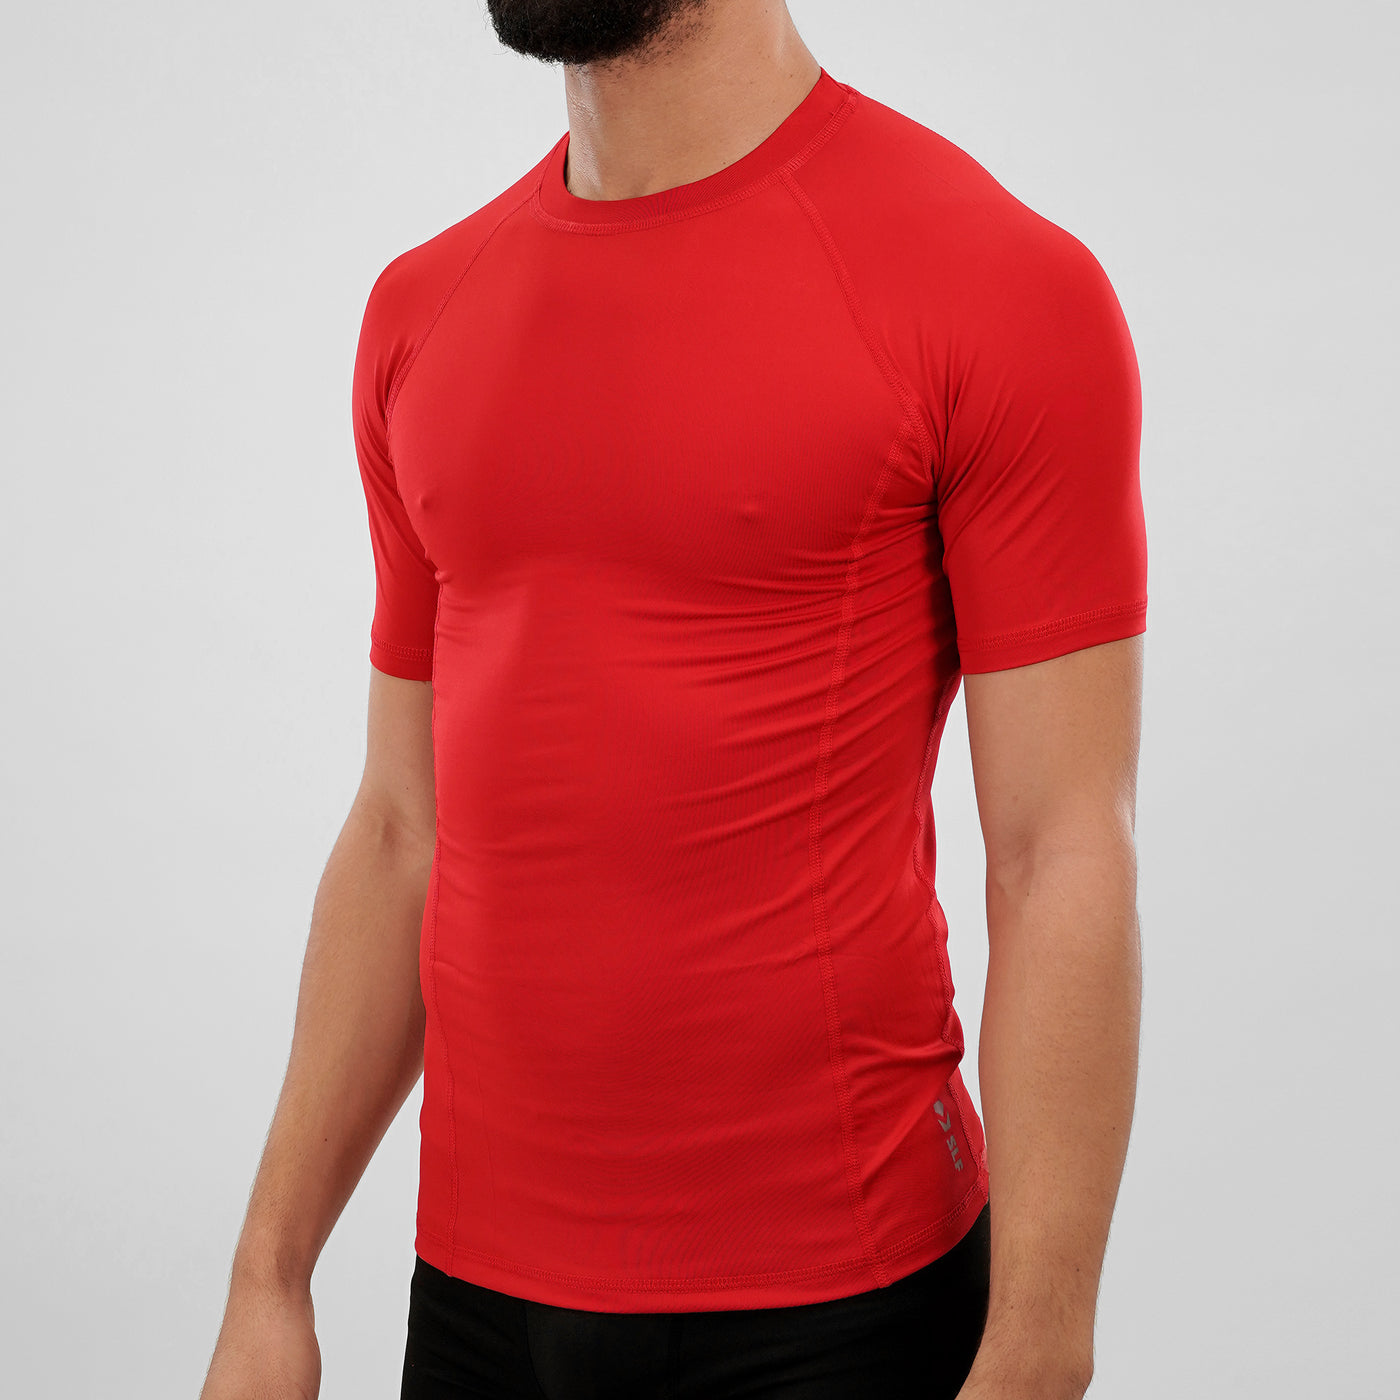 Red Compression Shirt